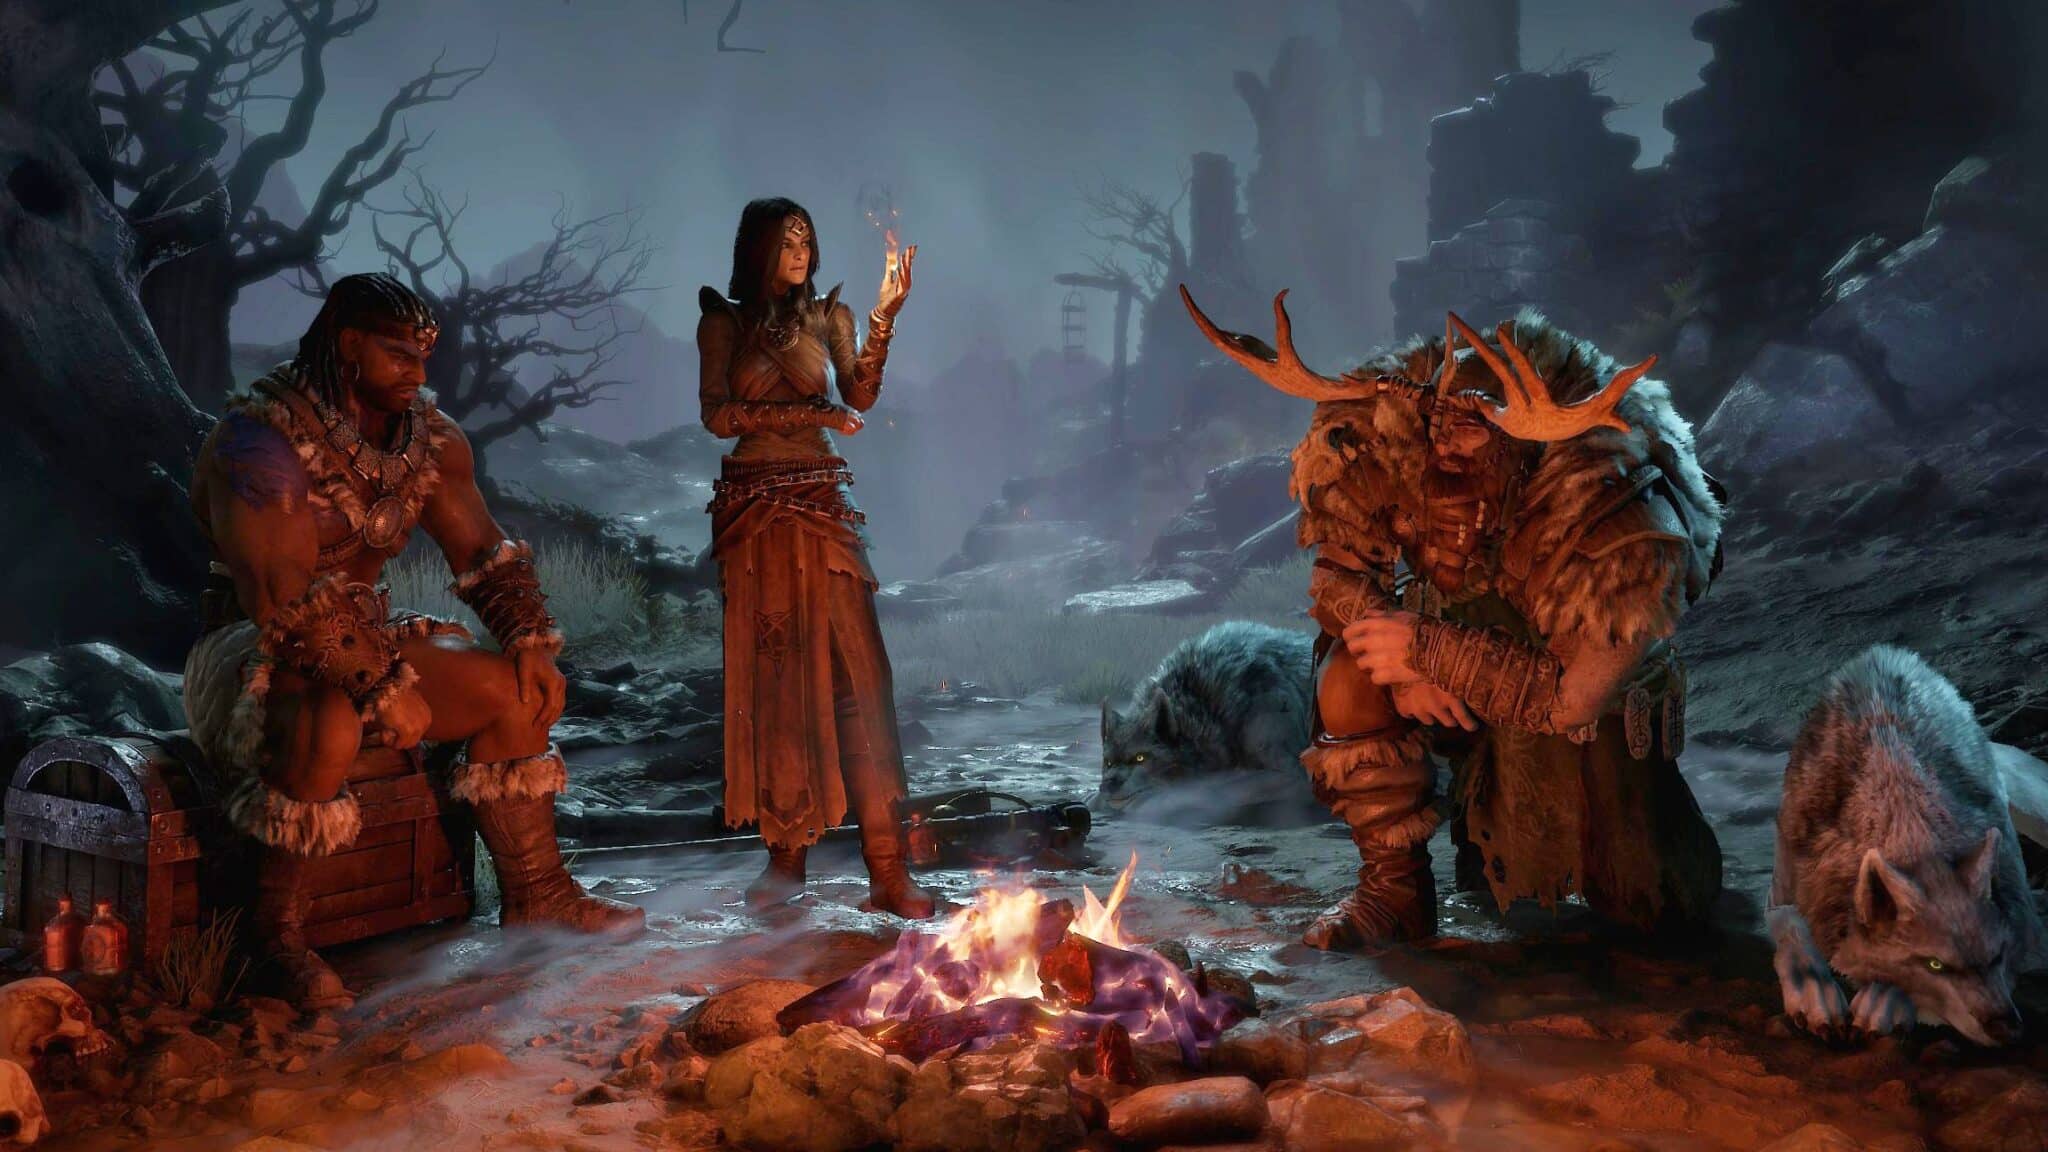 (A homage to Diablo 2: In the character selection all classes sit together around the campfire again)